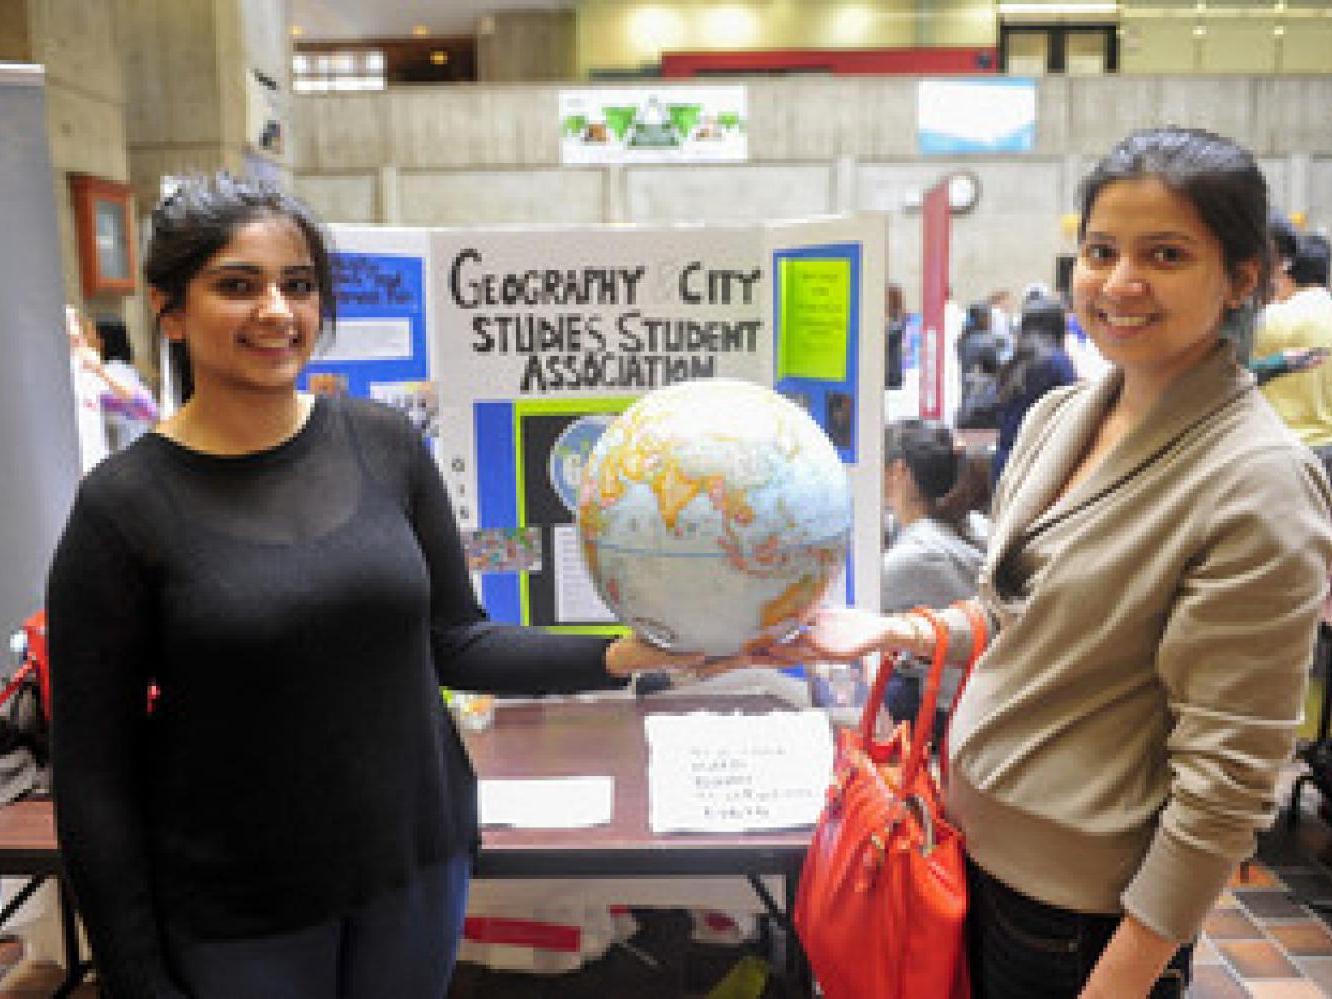 GCSA is the Departmental Student Association for City Studies and Geography students at UTSC.